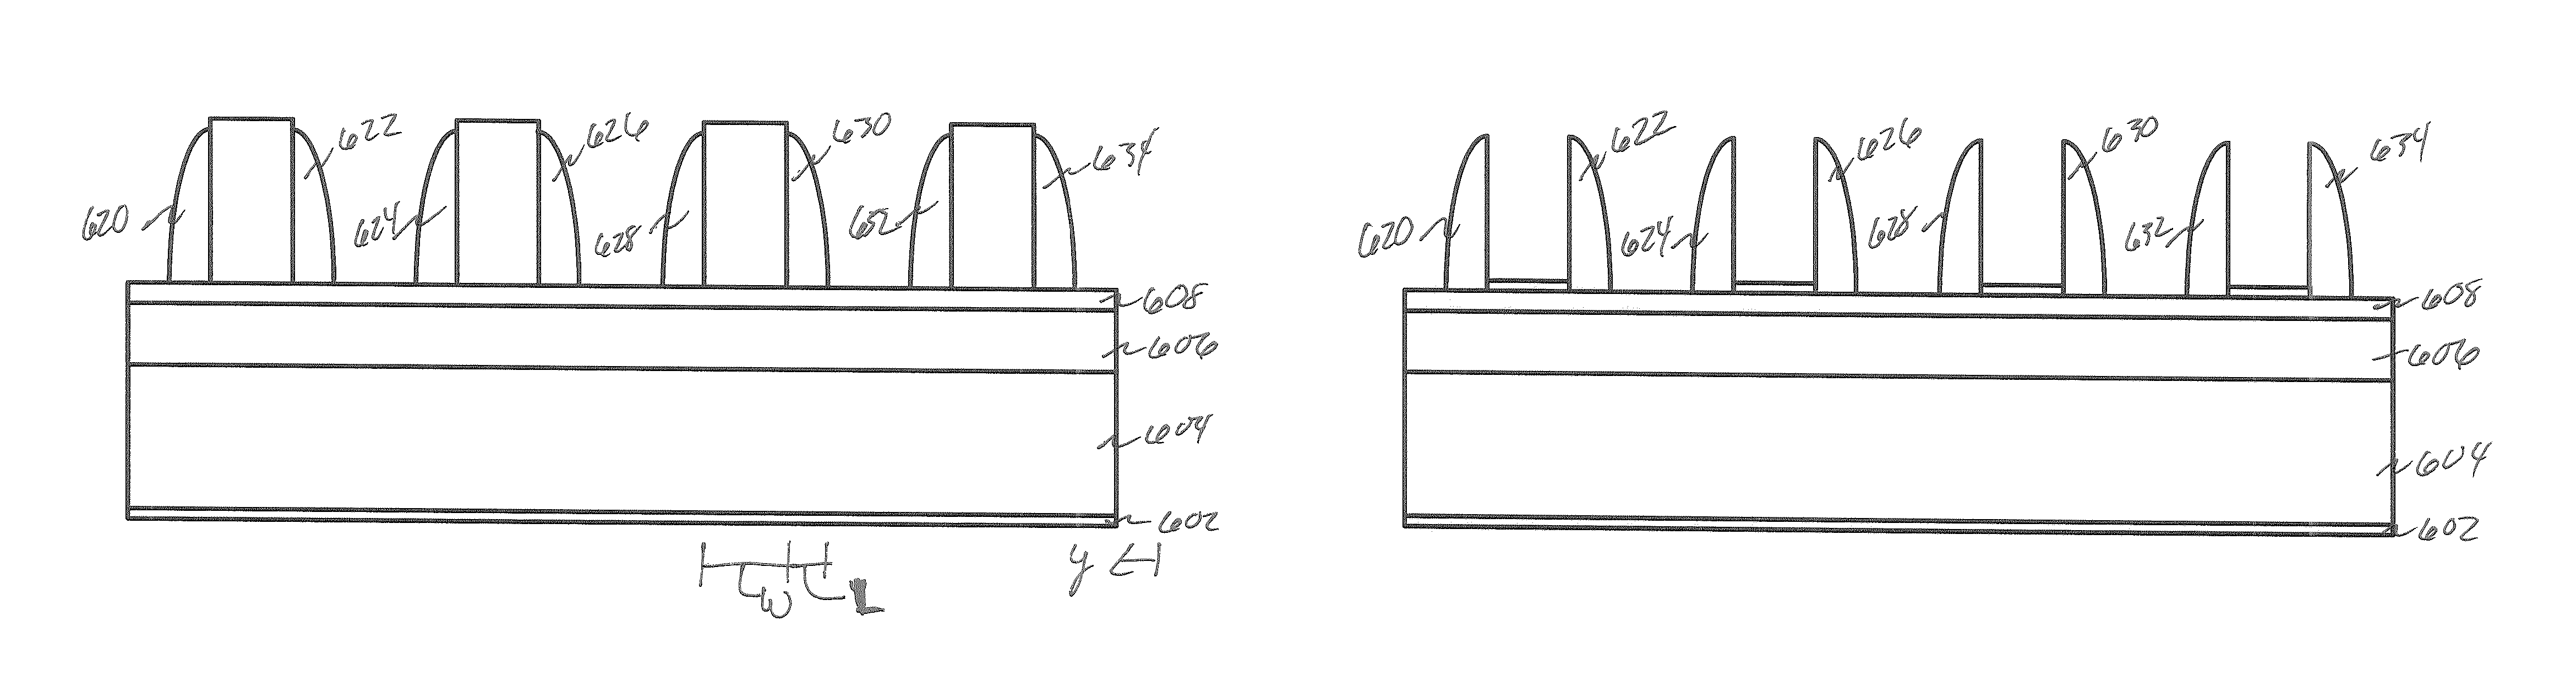 Spacer patterns using assist layer for high density semiconductor devices